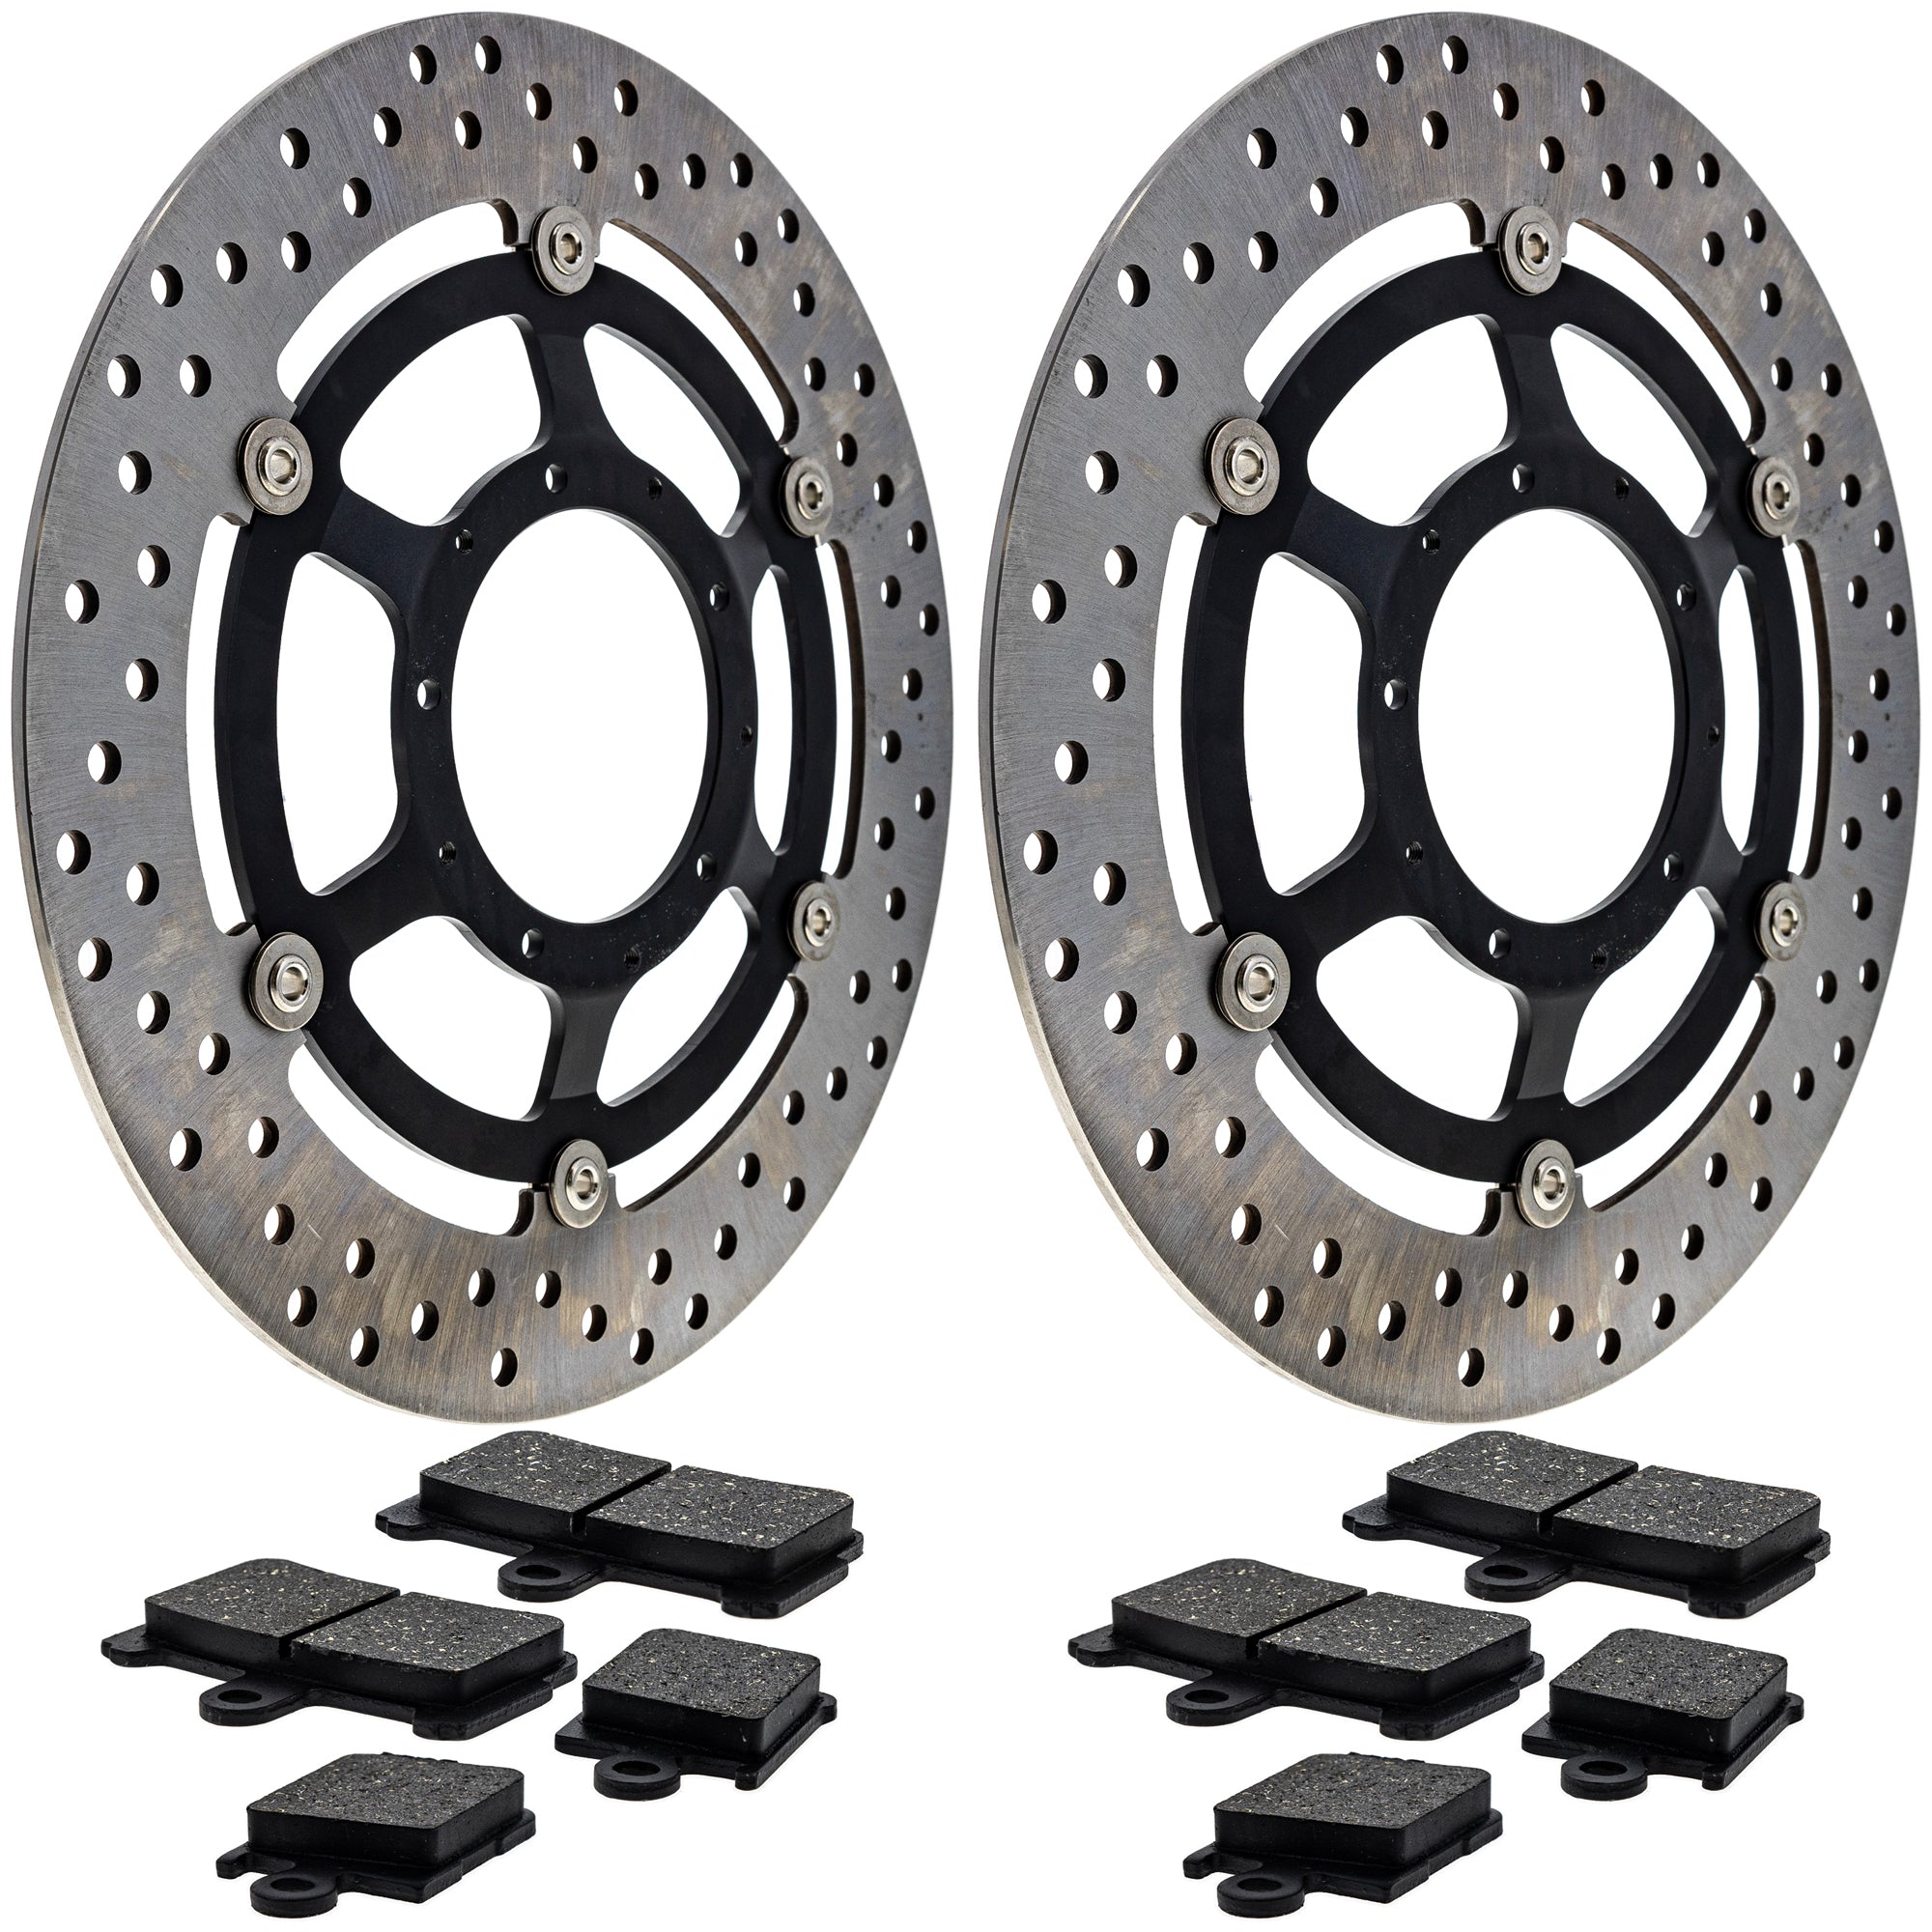 Complete Front or Rear Pad and Rotor Set for zOTHER Kawasaki Interceptor 06455-MGE-016 NICHE MK1007500